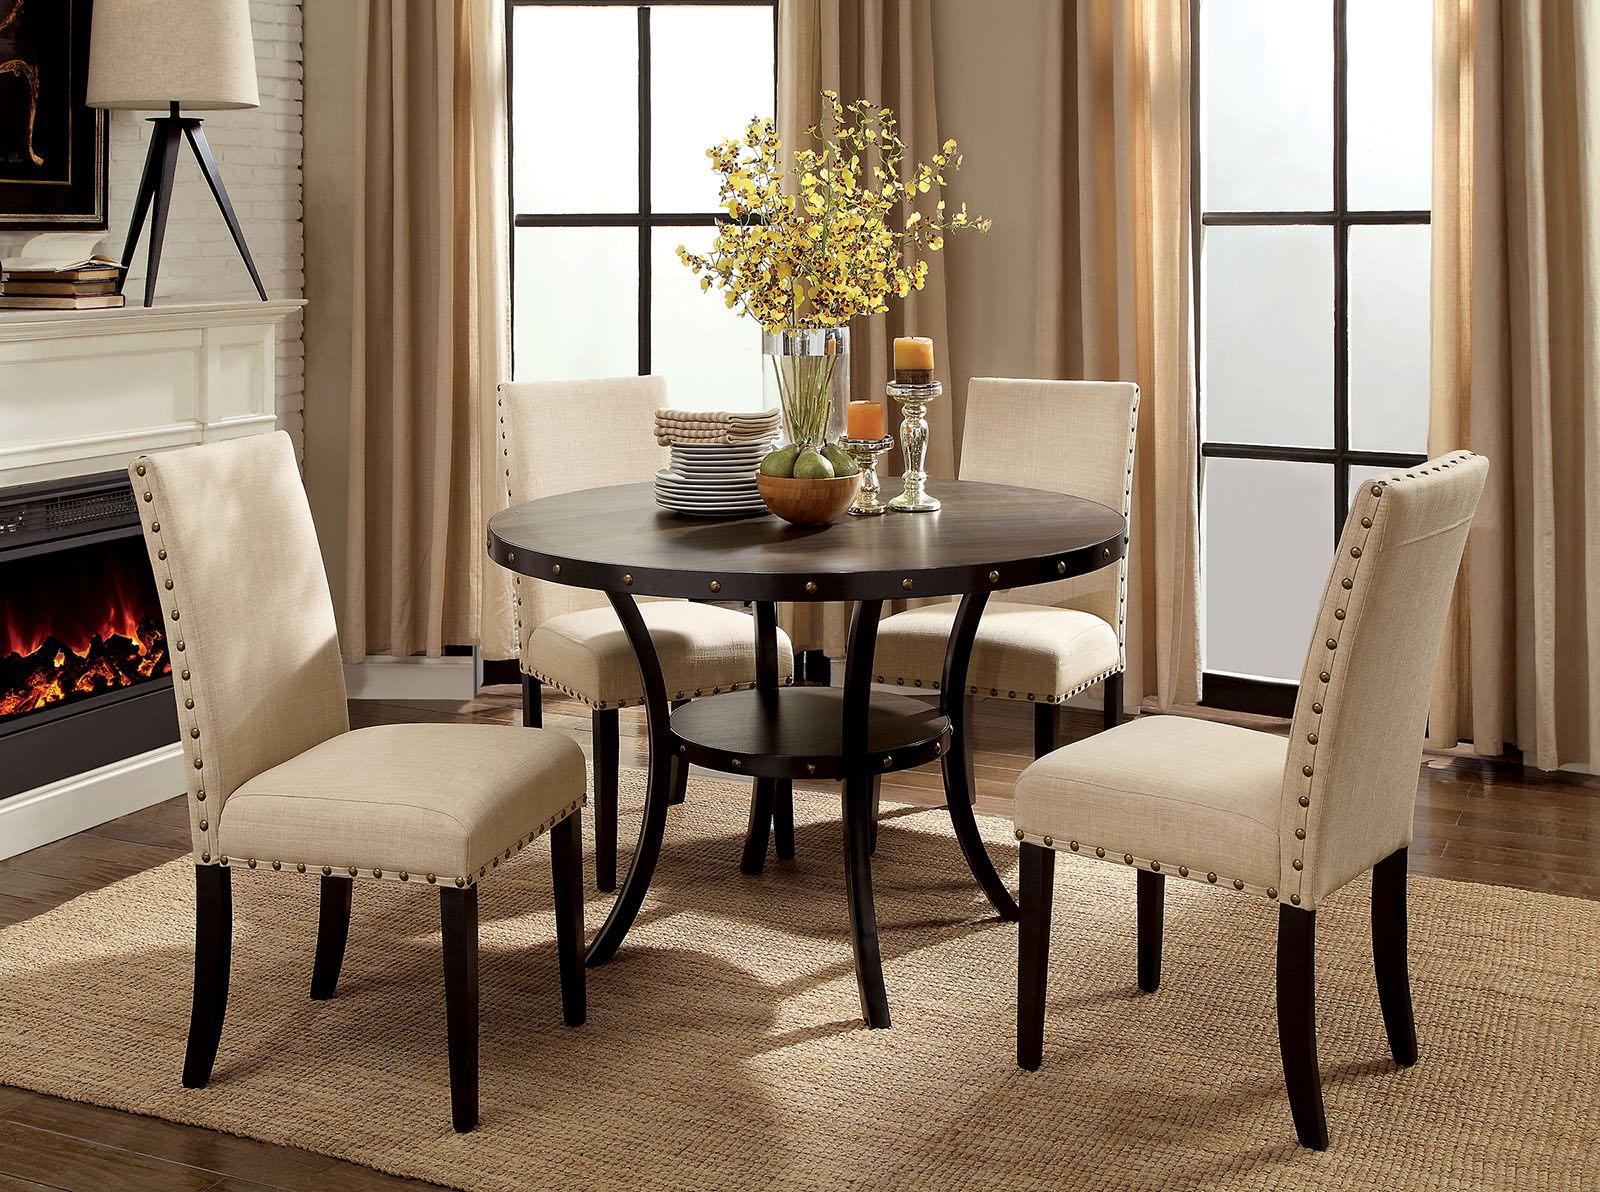 Furniture of America - Kaitlin - Round Dining Table - Light Walnut / Beige - 5th Avenue Furniture